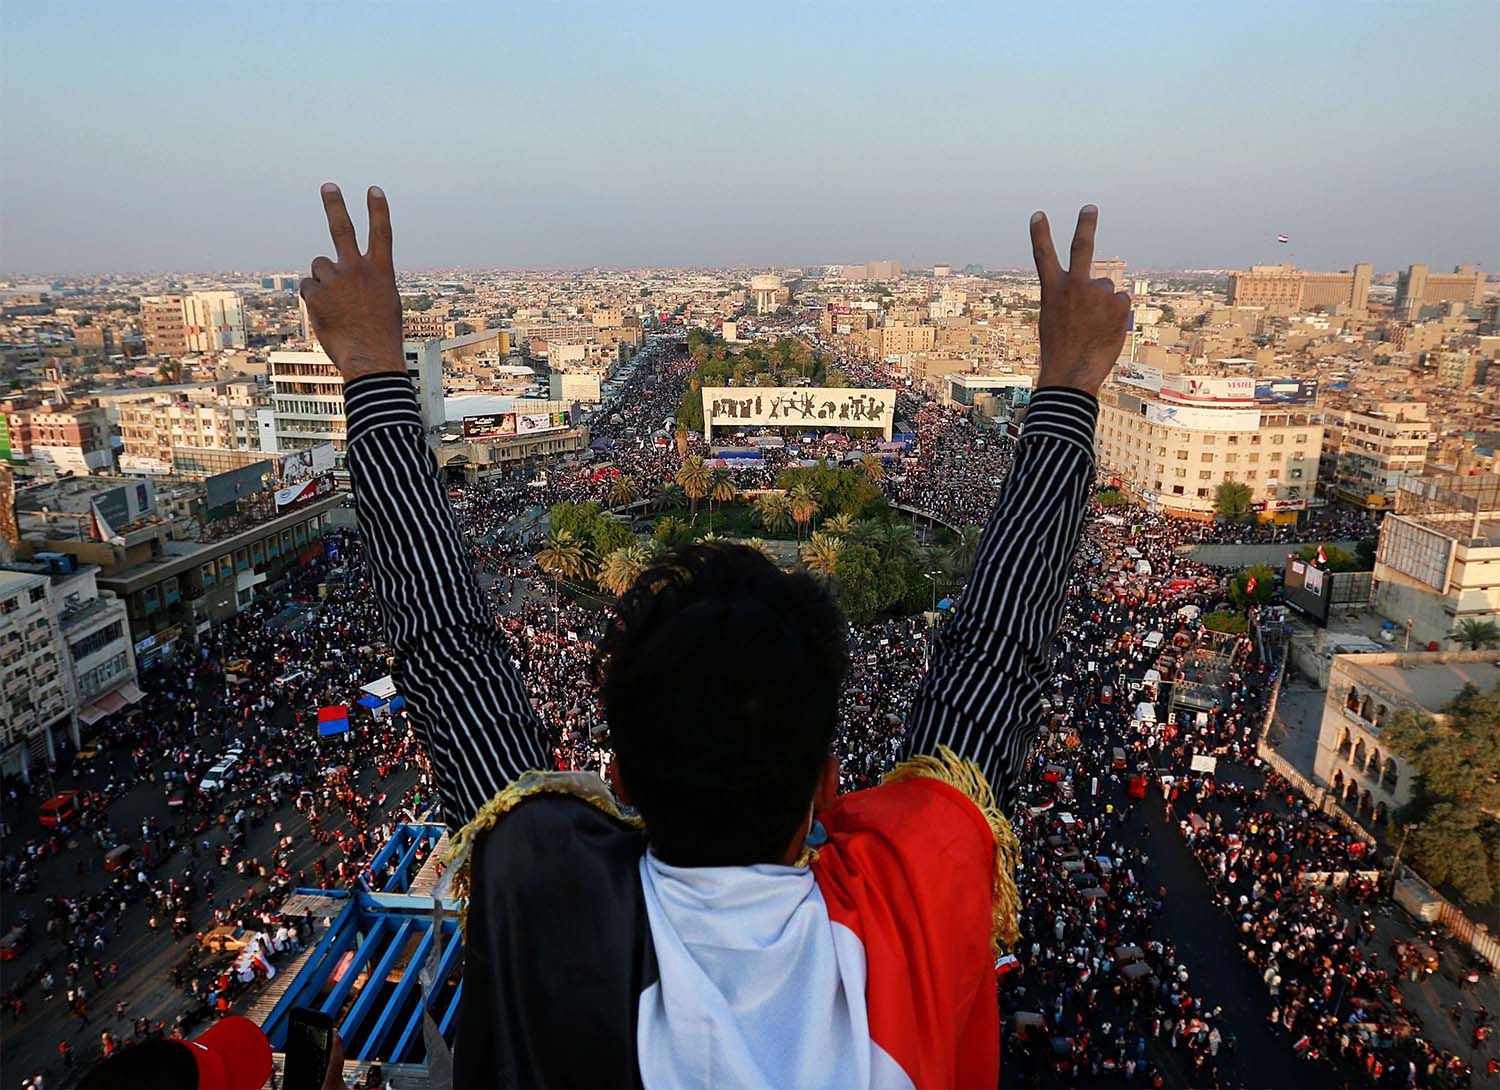 A protester flashes the victory sign while anti-government protesters gather in Tahrir Square during ongoing protests in Baghdad